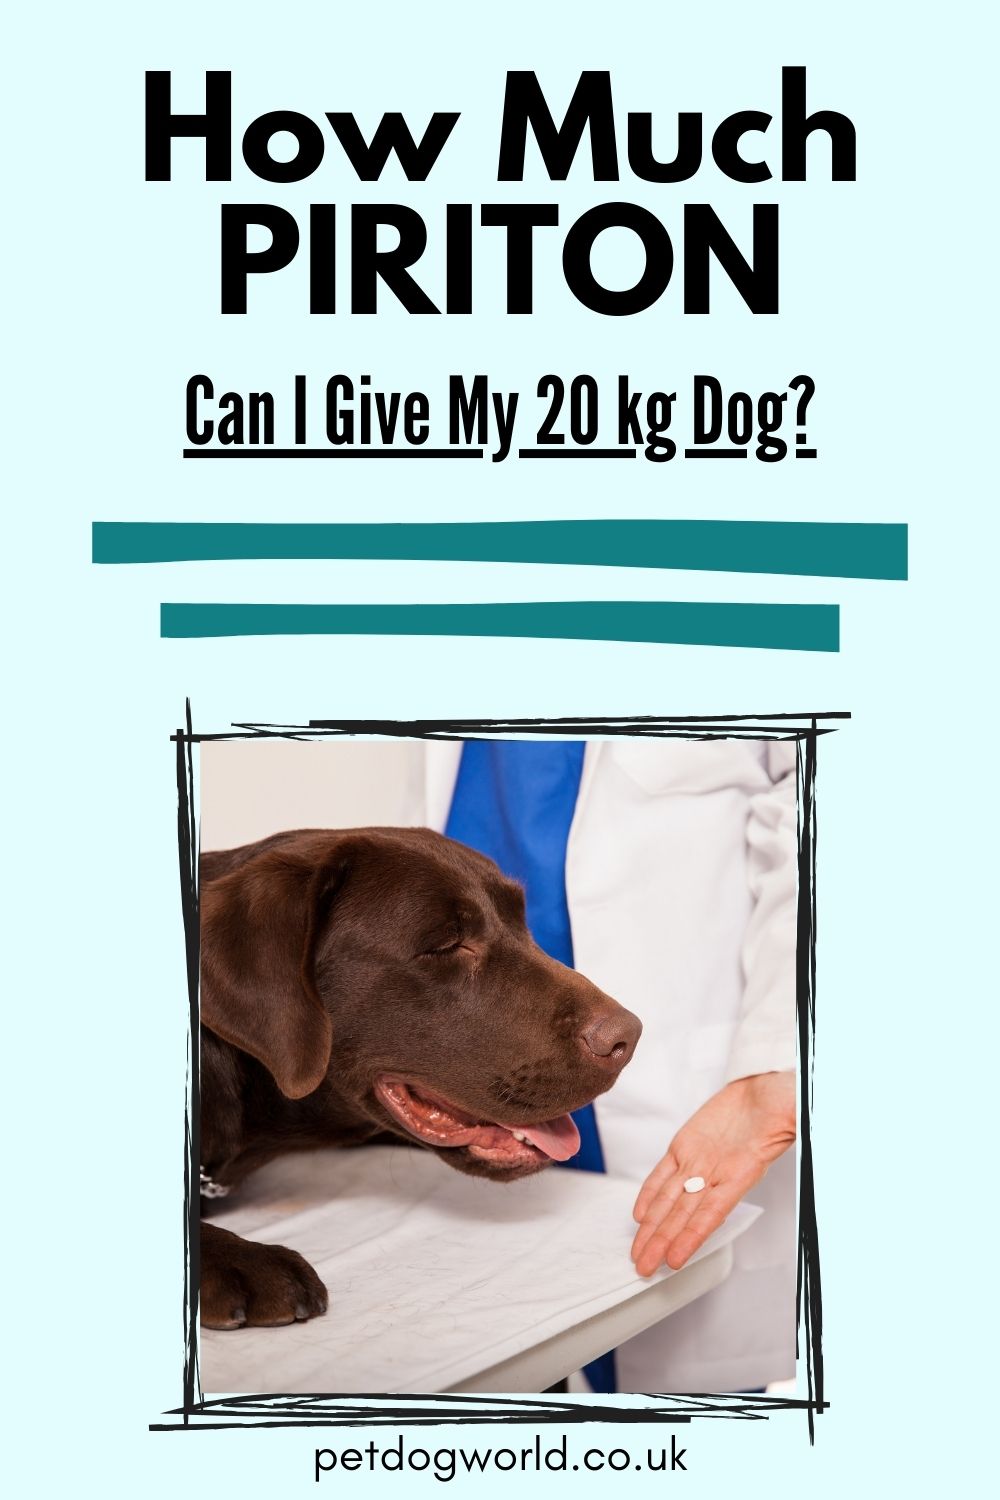 Safely administer Piriton to your 20kg dog for allergies. Learn dosage, administration, & risks to ensure your pet's well-being.